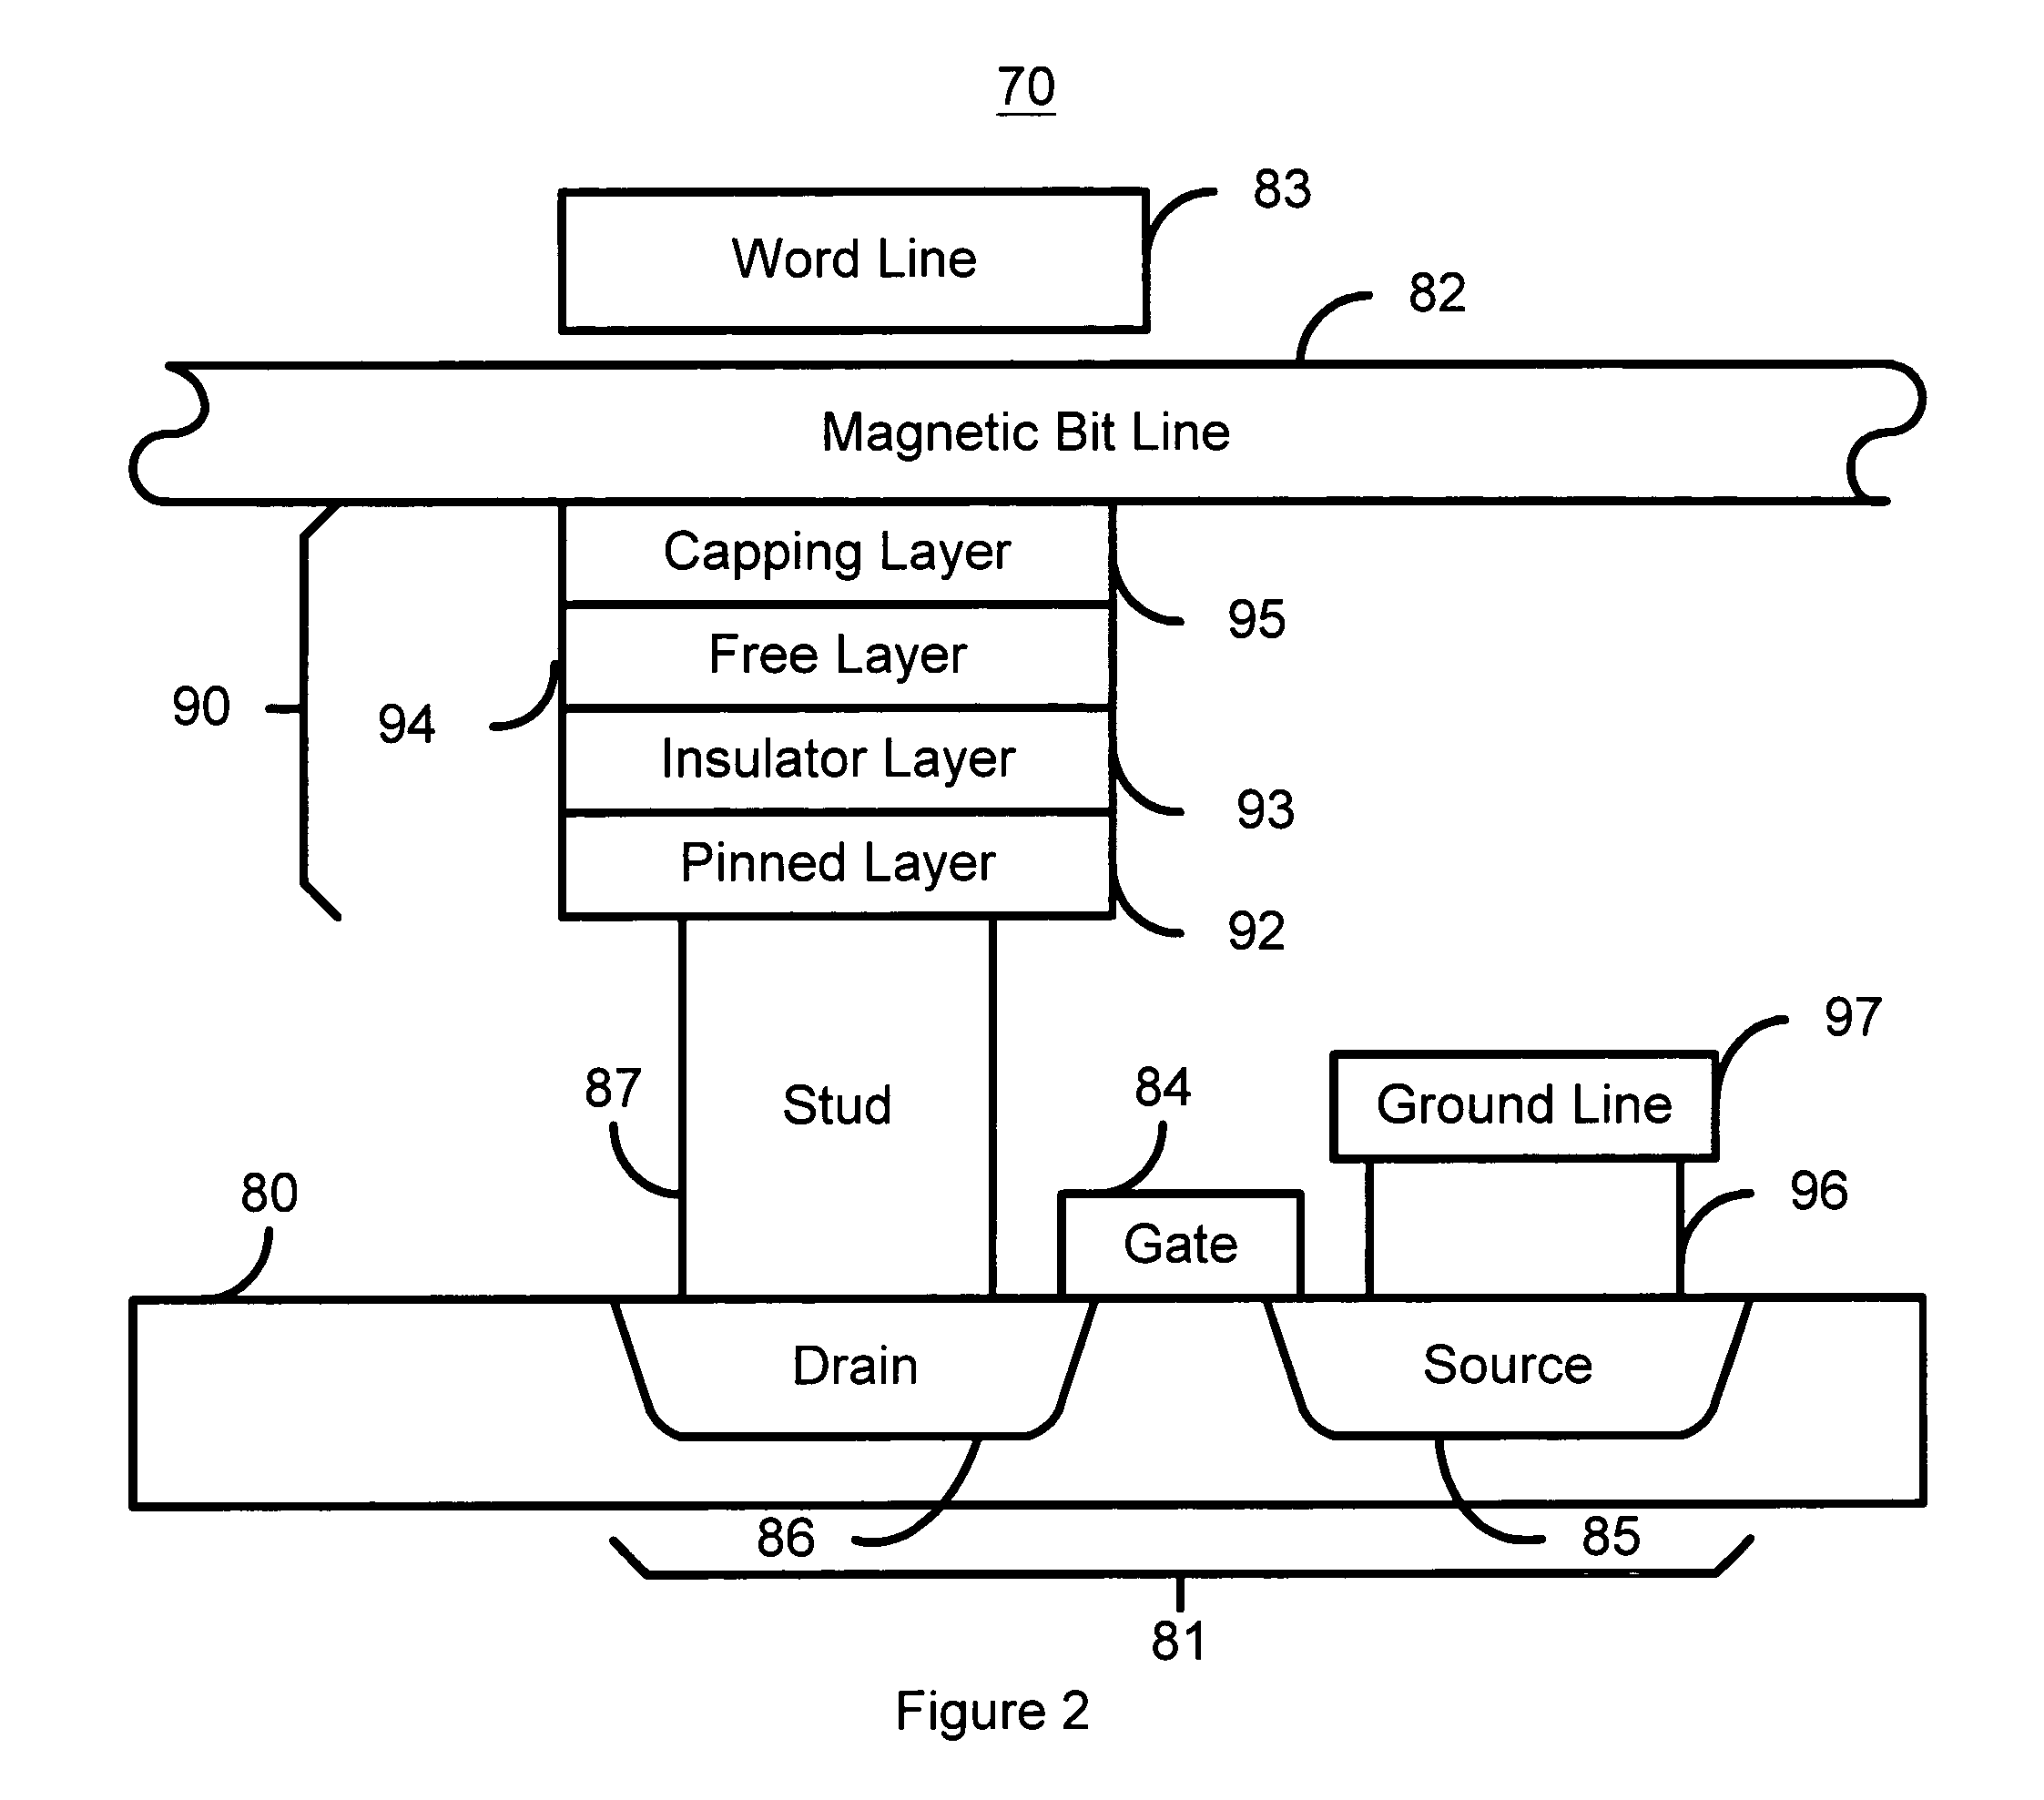 Magnetic tunneling junction cell array with shared reference layer for MRAM applications